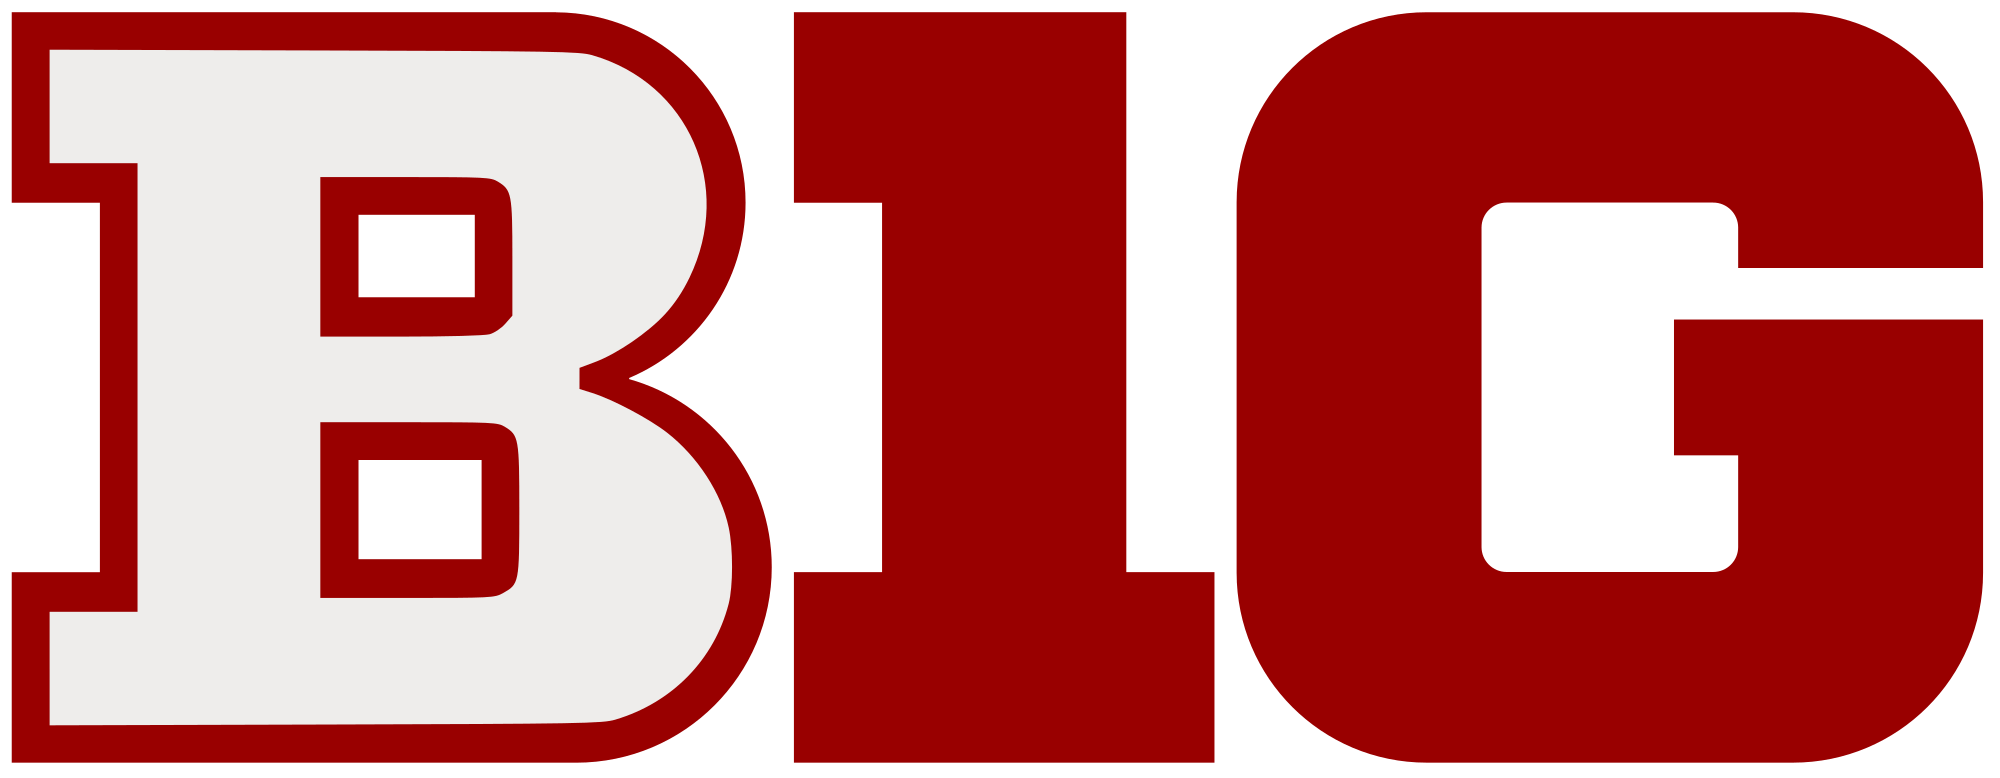 Indiana Logo - File:Big Ten logo in Indiana colors.svg - Wikimedia Commons